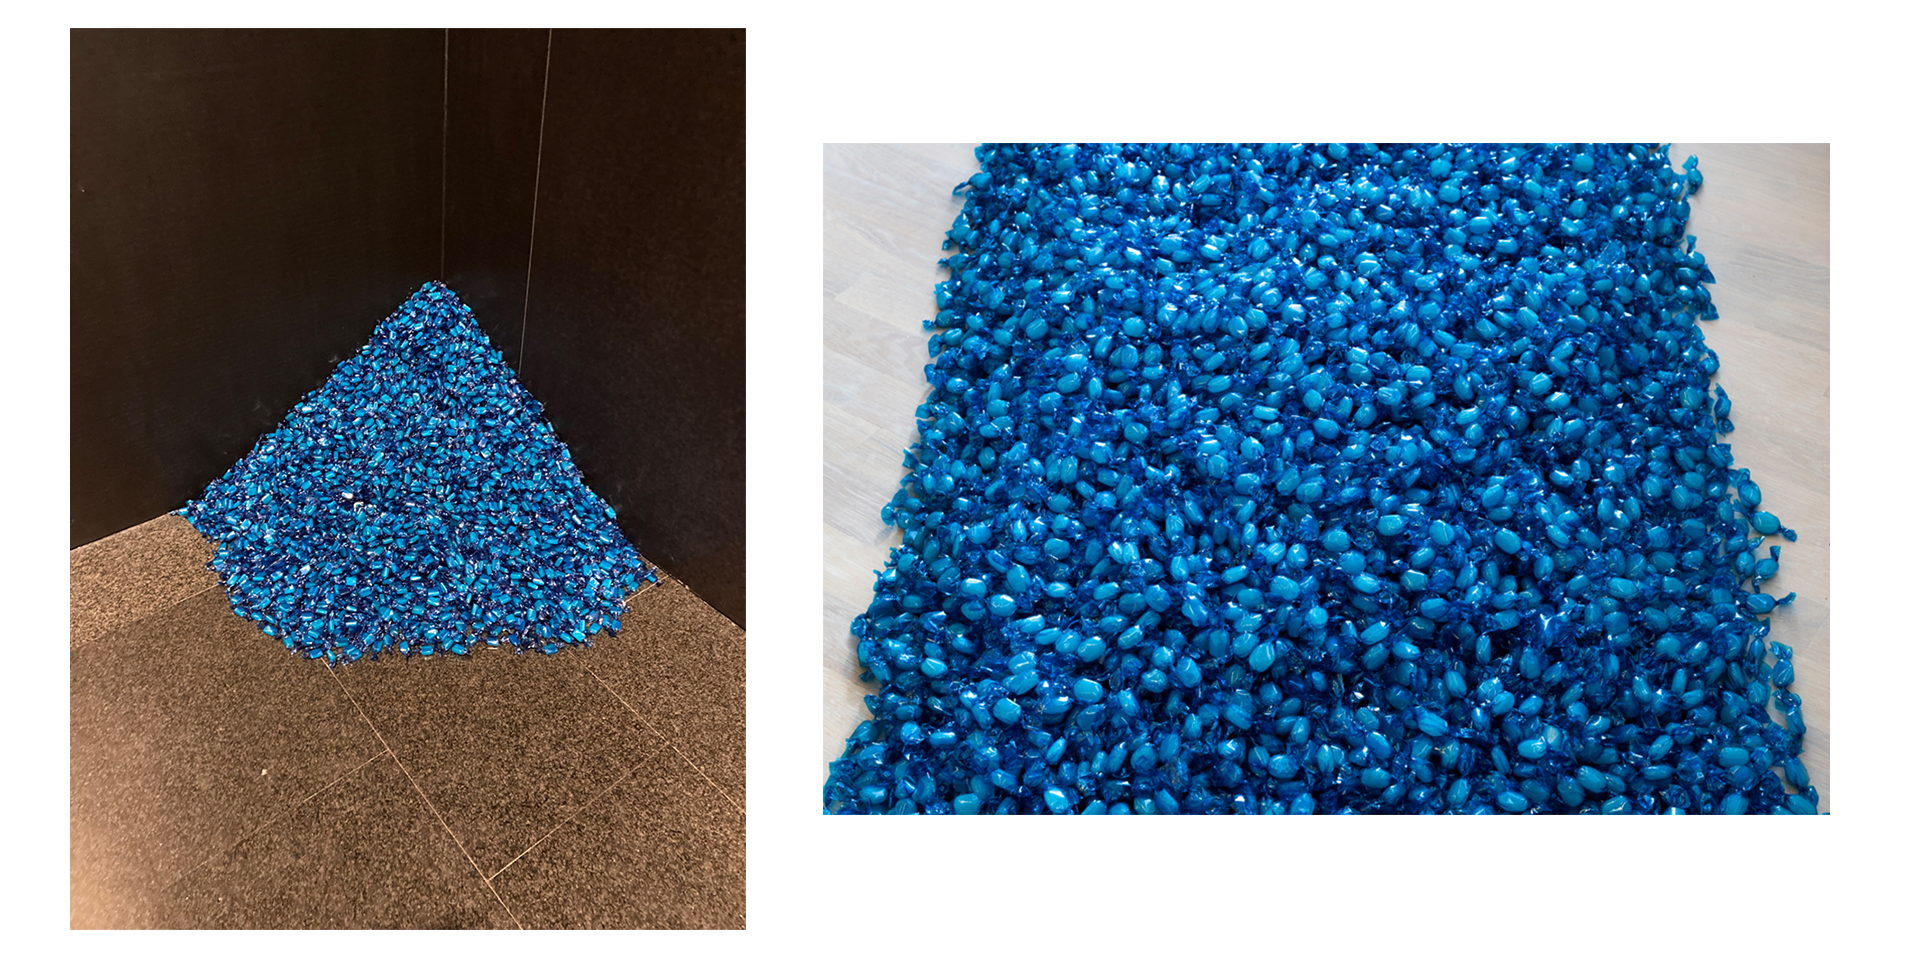 Left: A pile of candies with blue plastic wrappers heaped into a corner formed by black walls. Right: A swath of candies with blue wrappers against a wood floor. The candy is centered and its overall extent is cut off by the frame of the photograph.